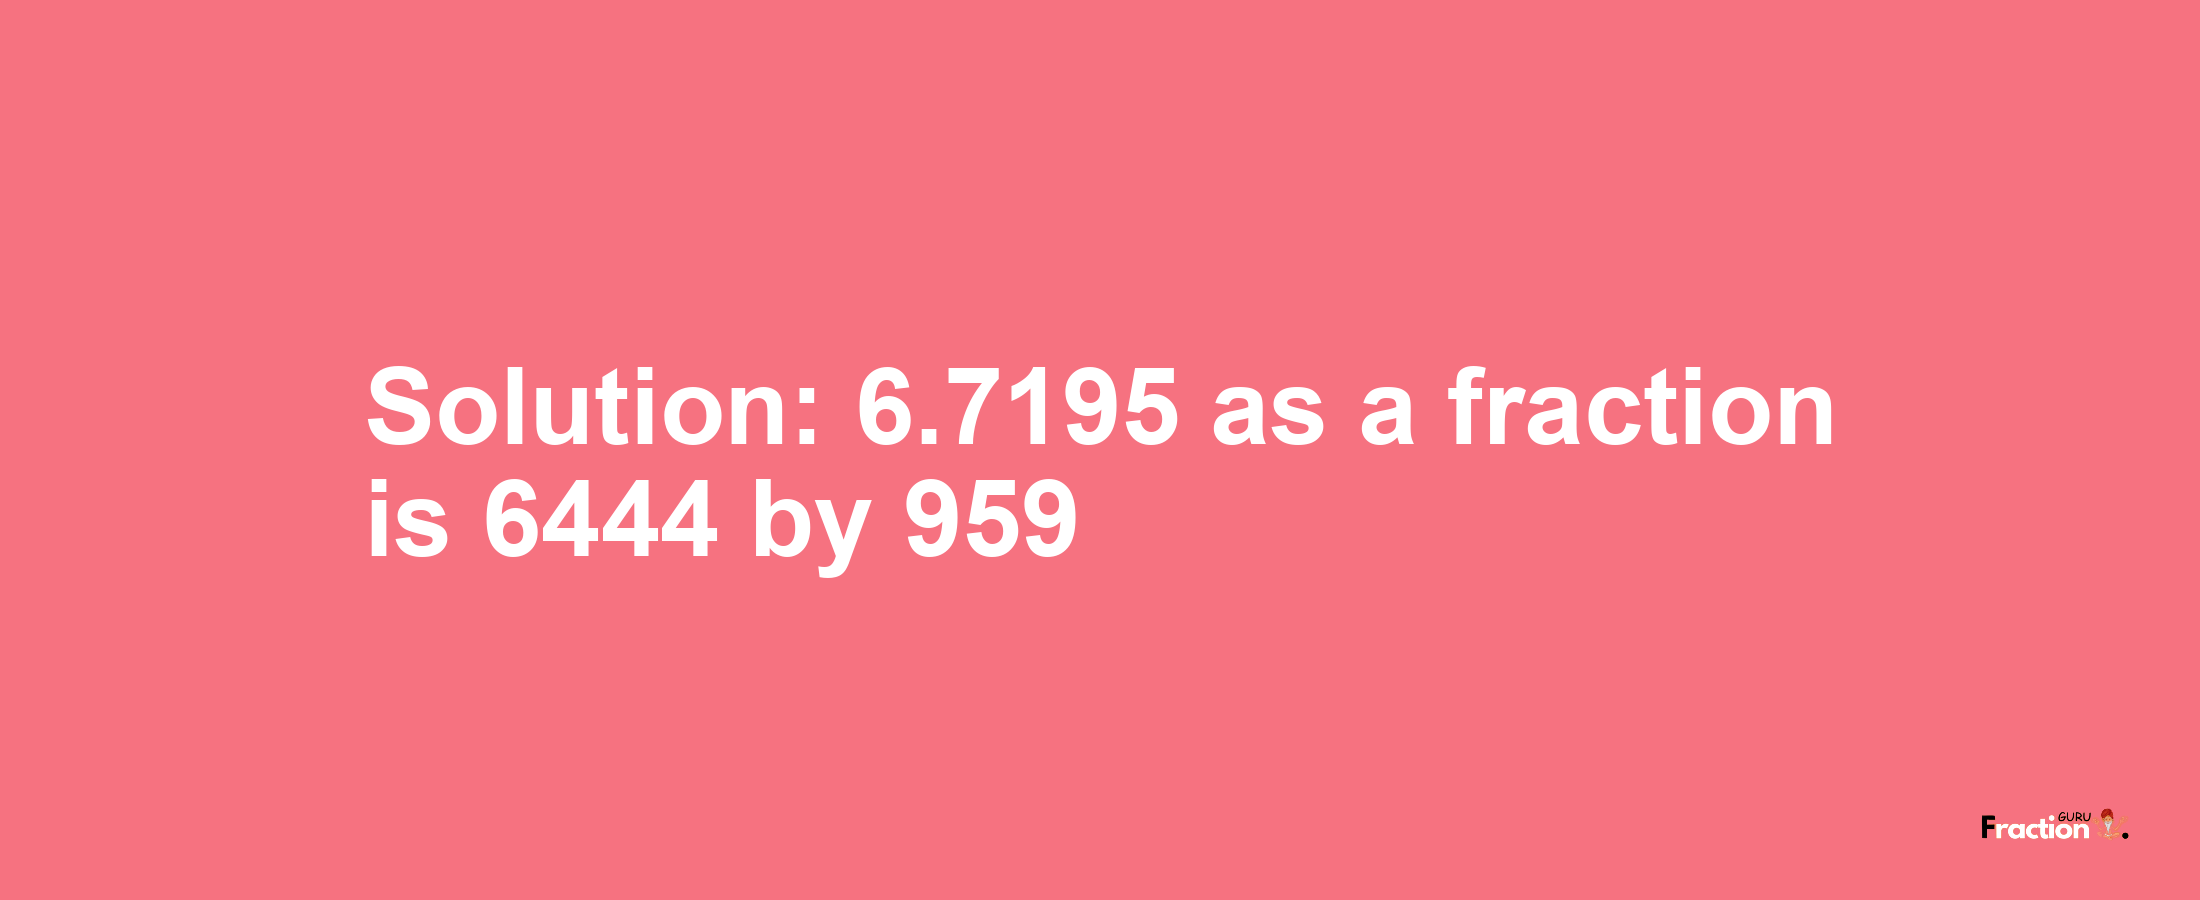 Solution:6.7195 as a fraction is 6444/959